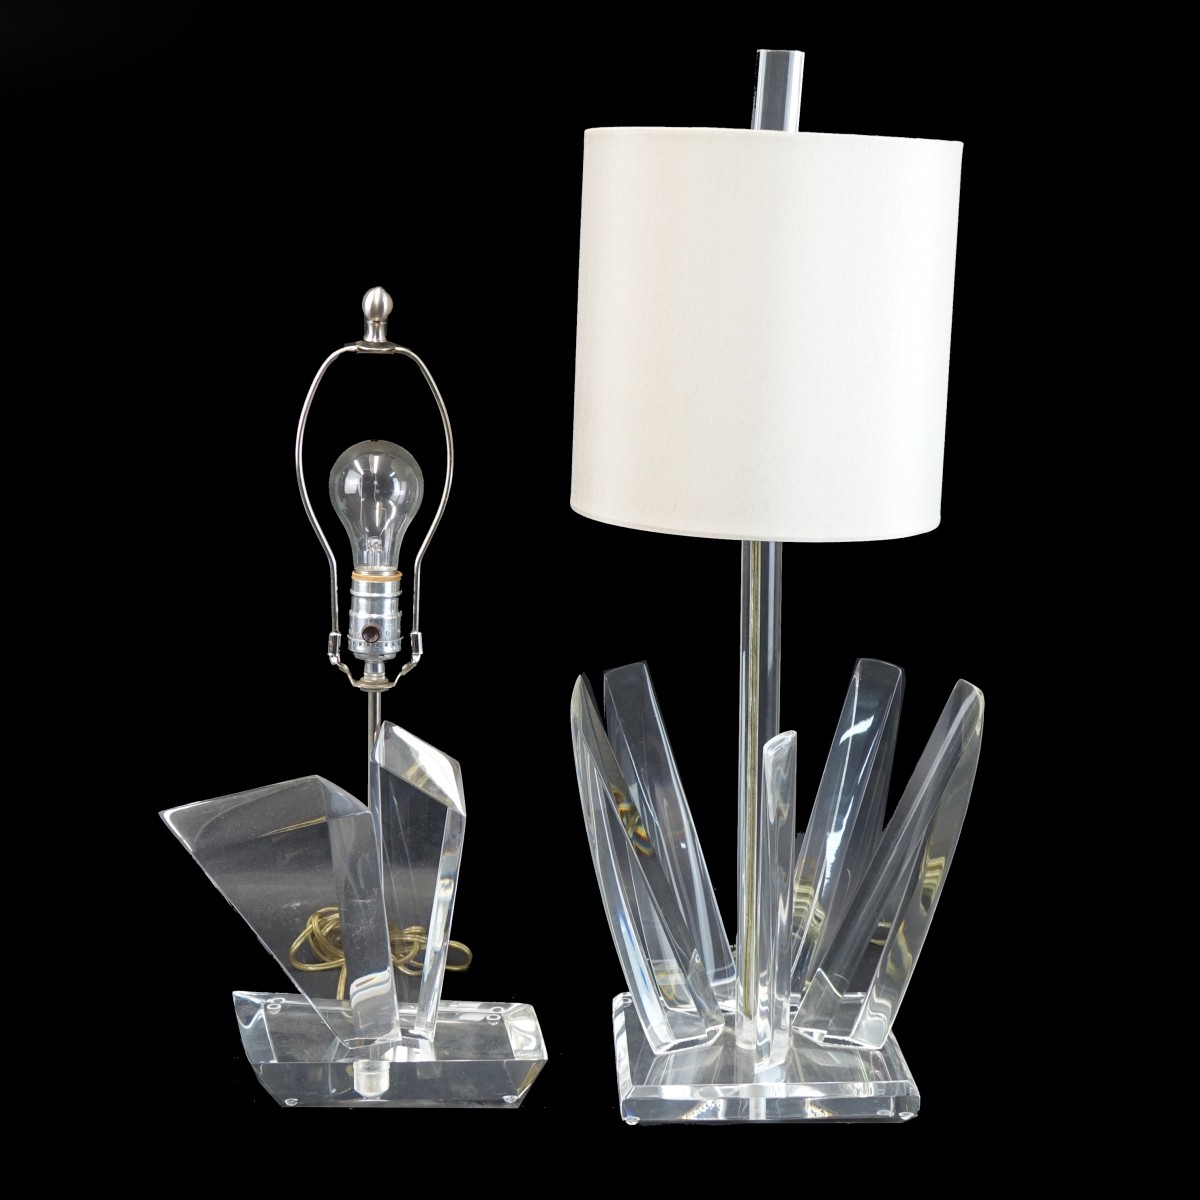 Two (2) Van Teal Lucite Table Lamps